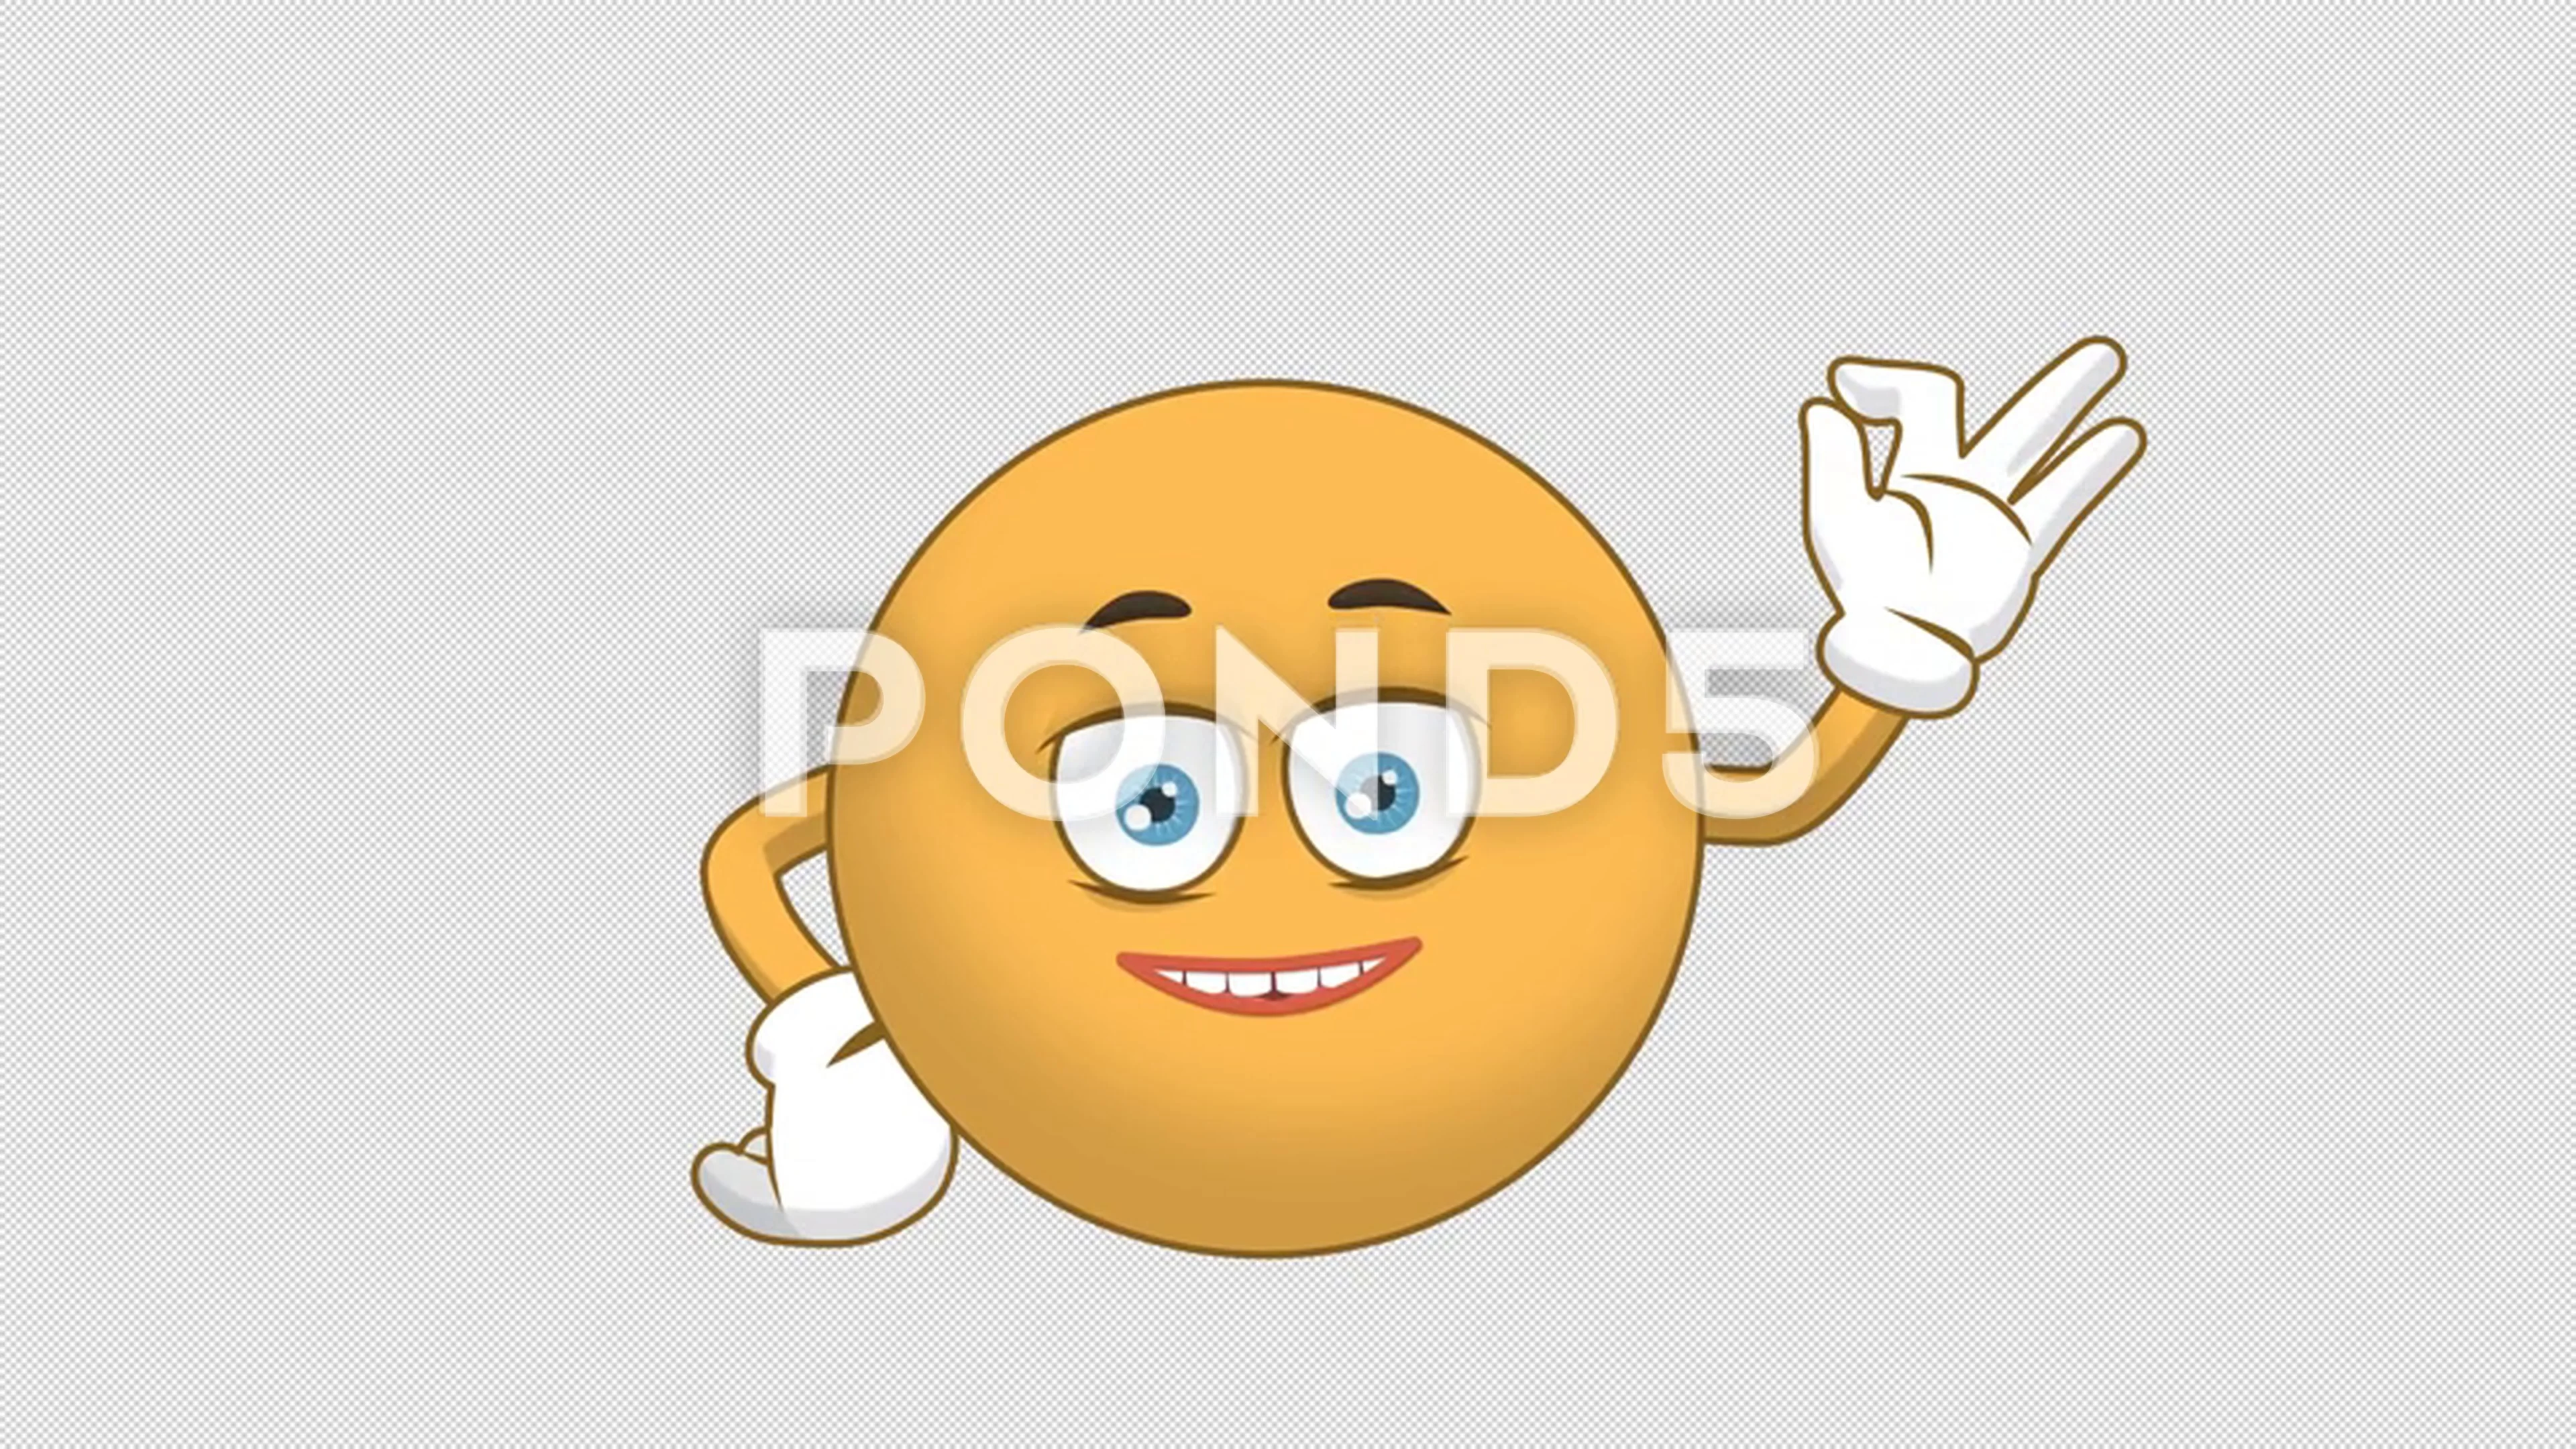 smiley face with thumbs up animation